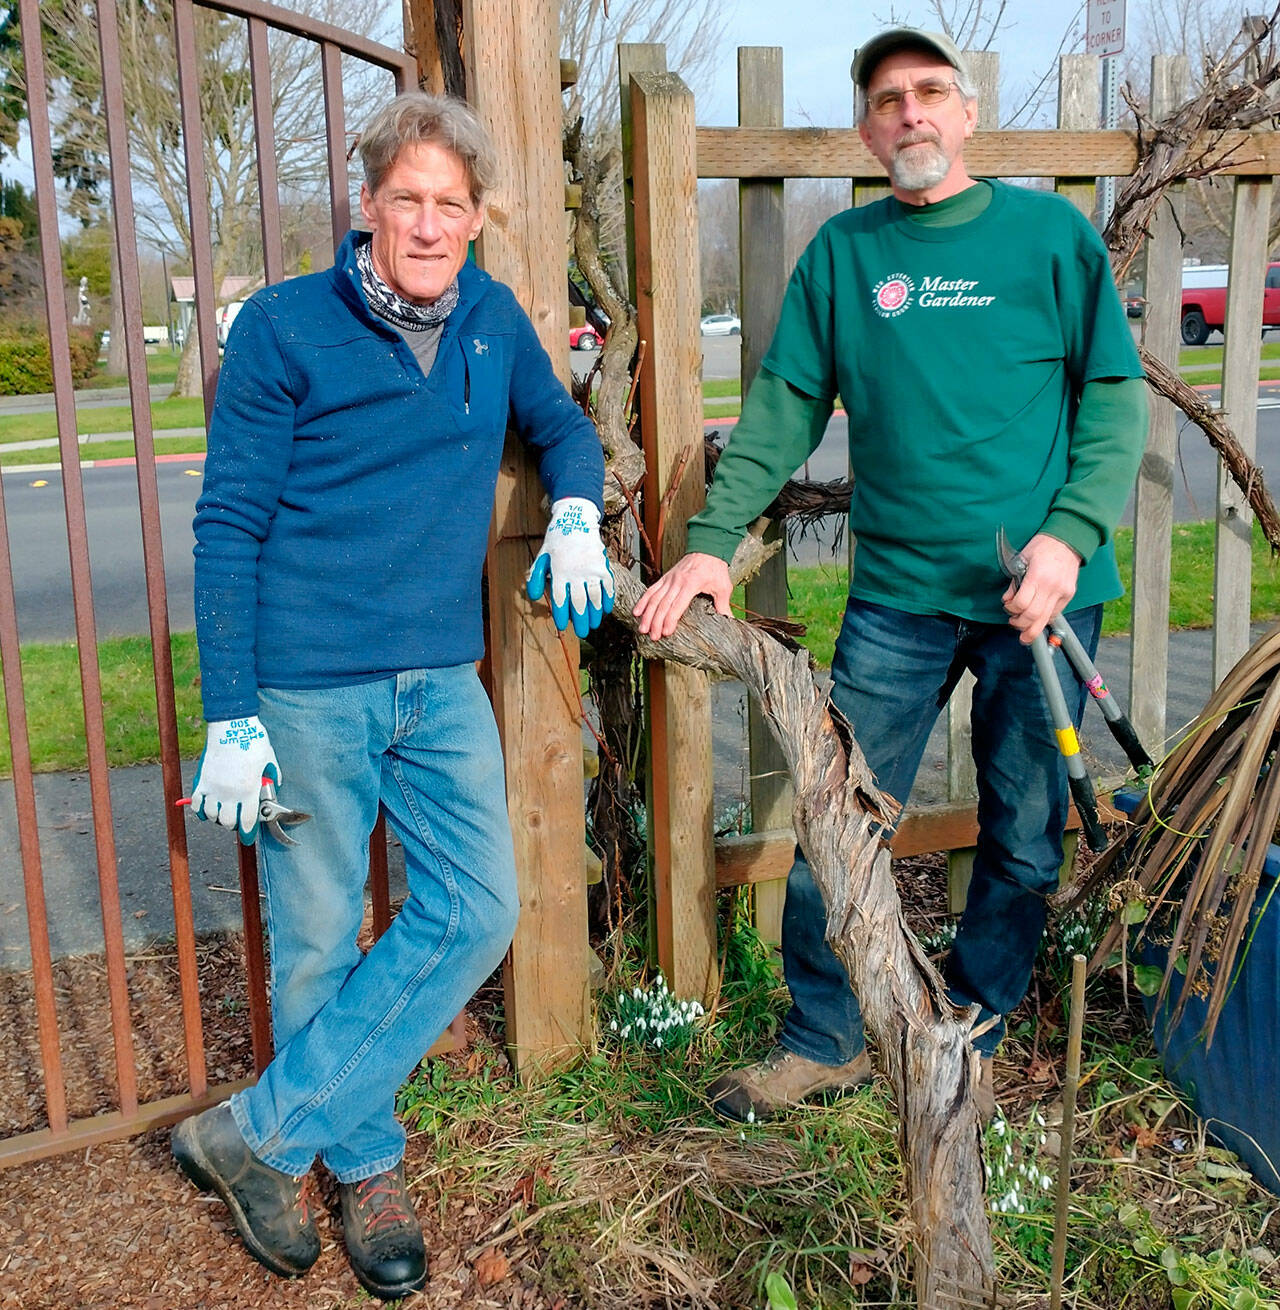 Clallam County Master Gardeners Gordon Clark and Keith Dekker will teach local gardeners how to prune successfully from 10:30 a.m.-noon on Saturday, April 2, at the Master Gardener Demonstration Garden, 2711 Woodcock Road.